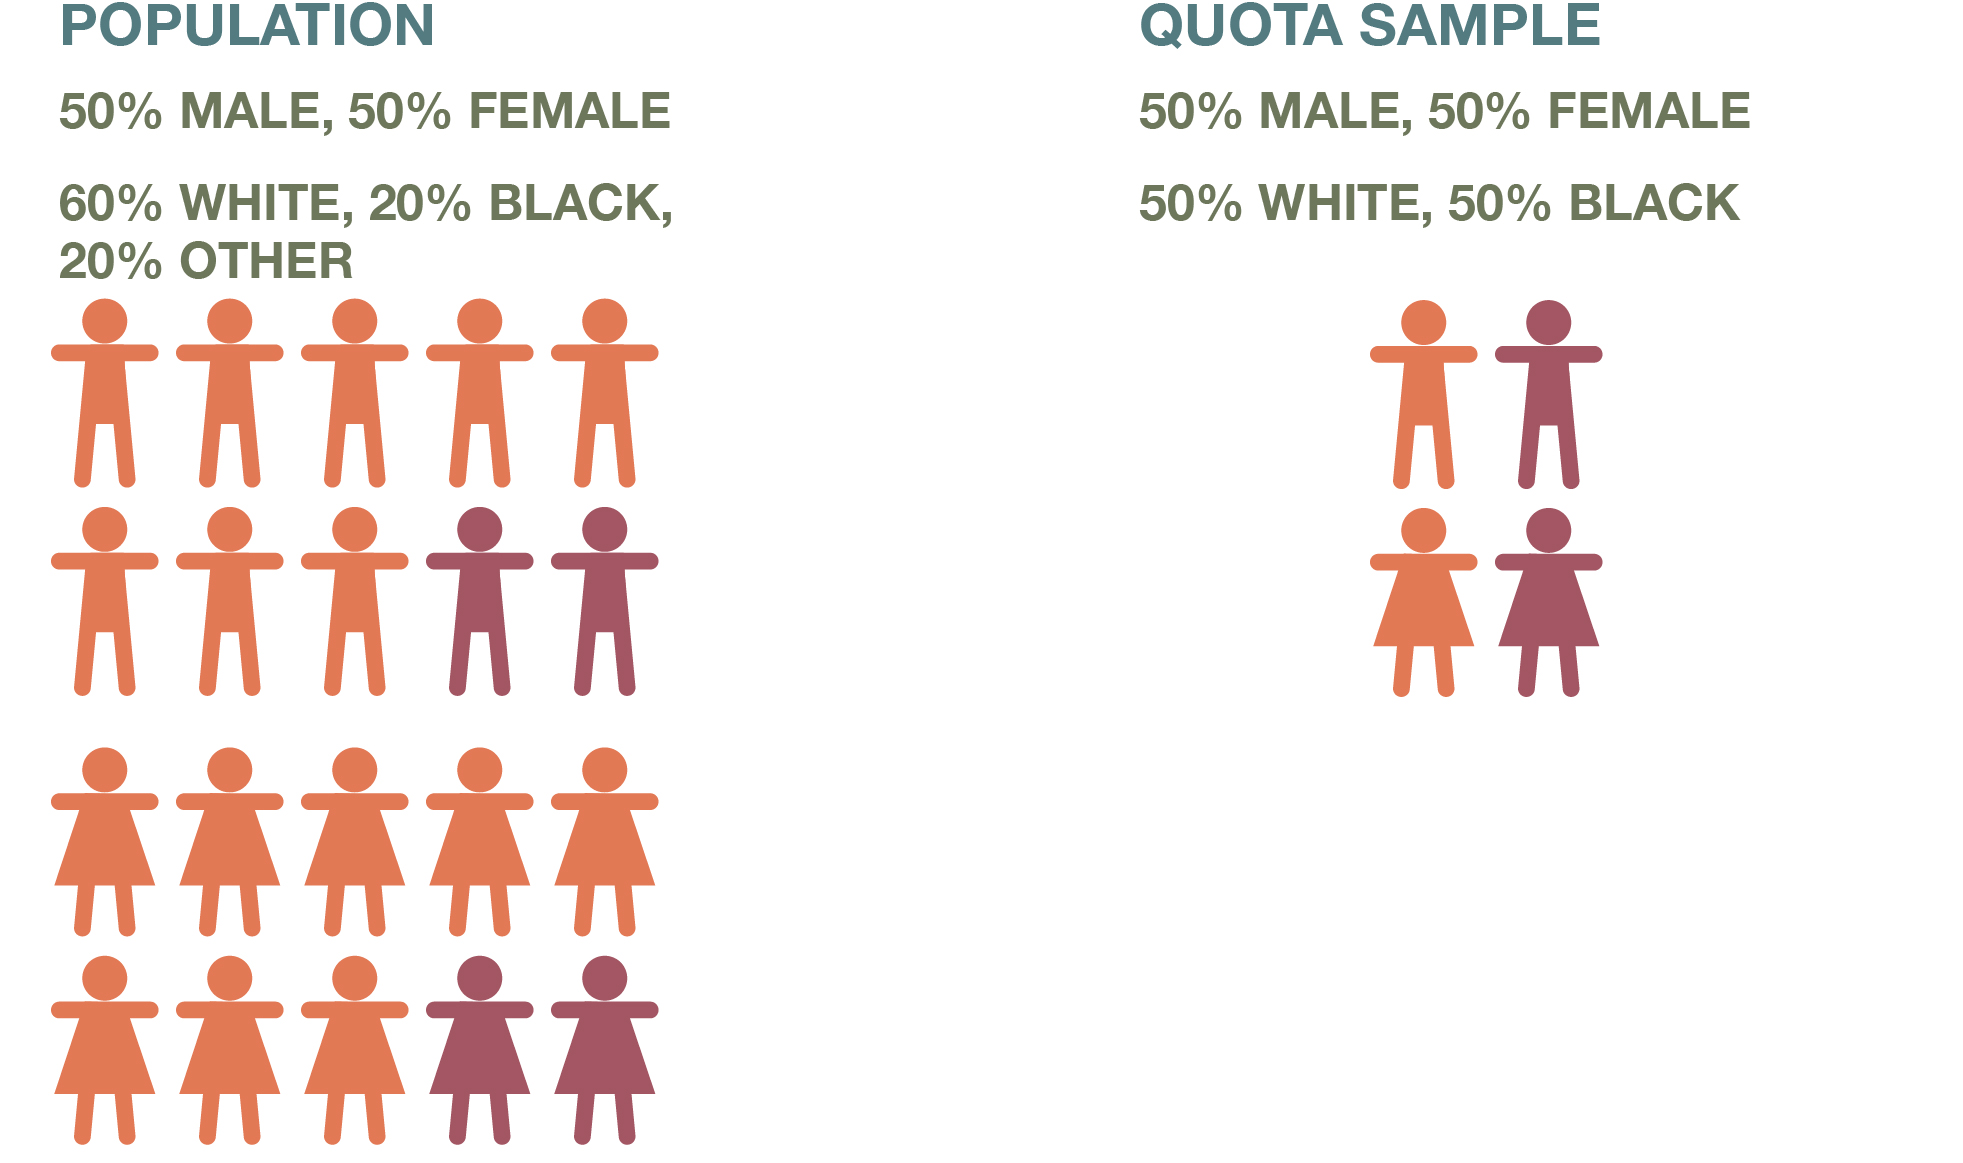 Diagram that illustrates the selection of sampling units based on two prespecified characteristics: race and gender.